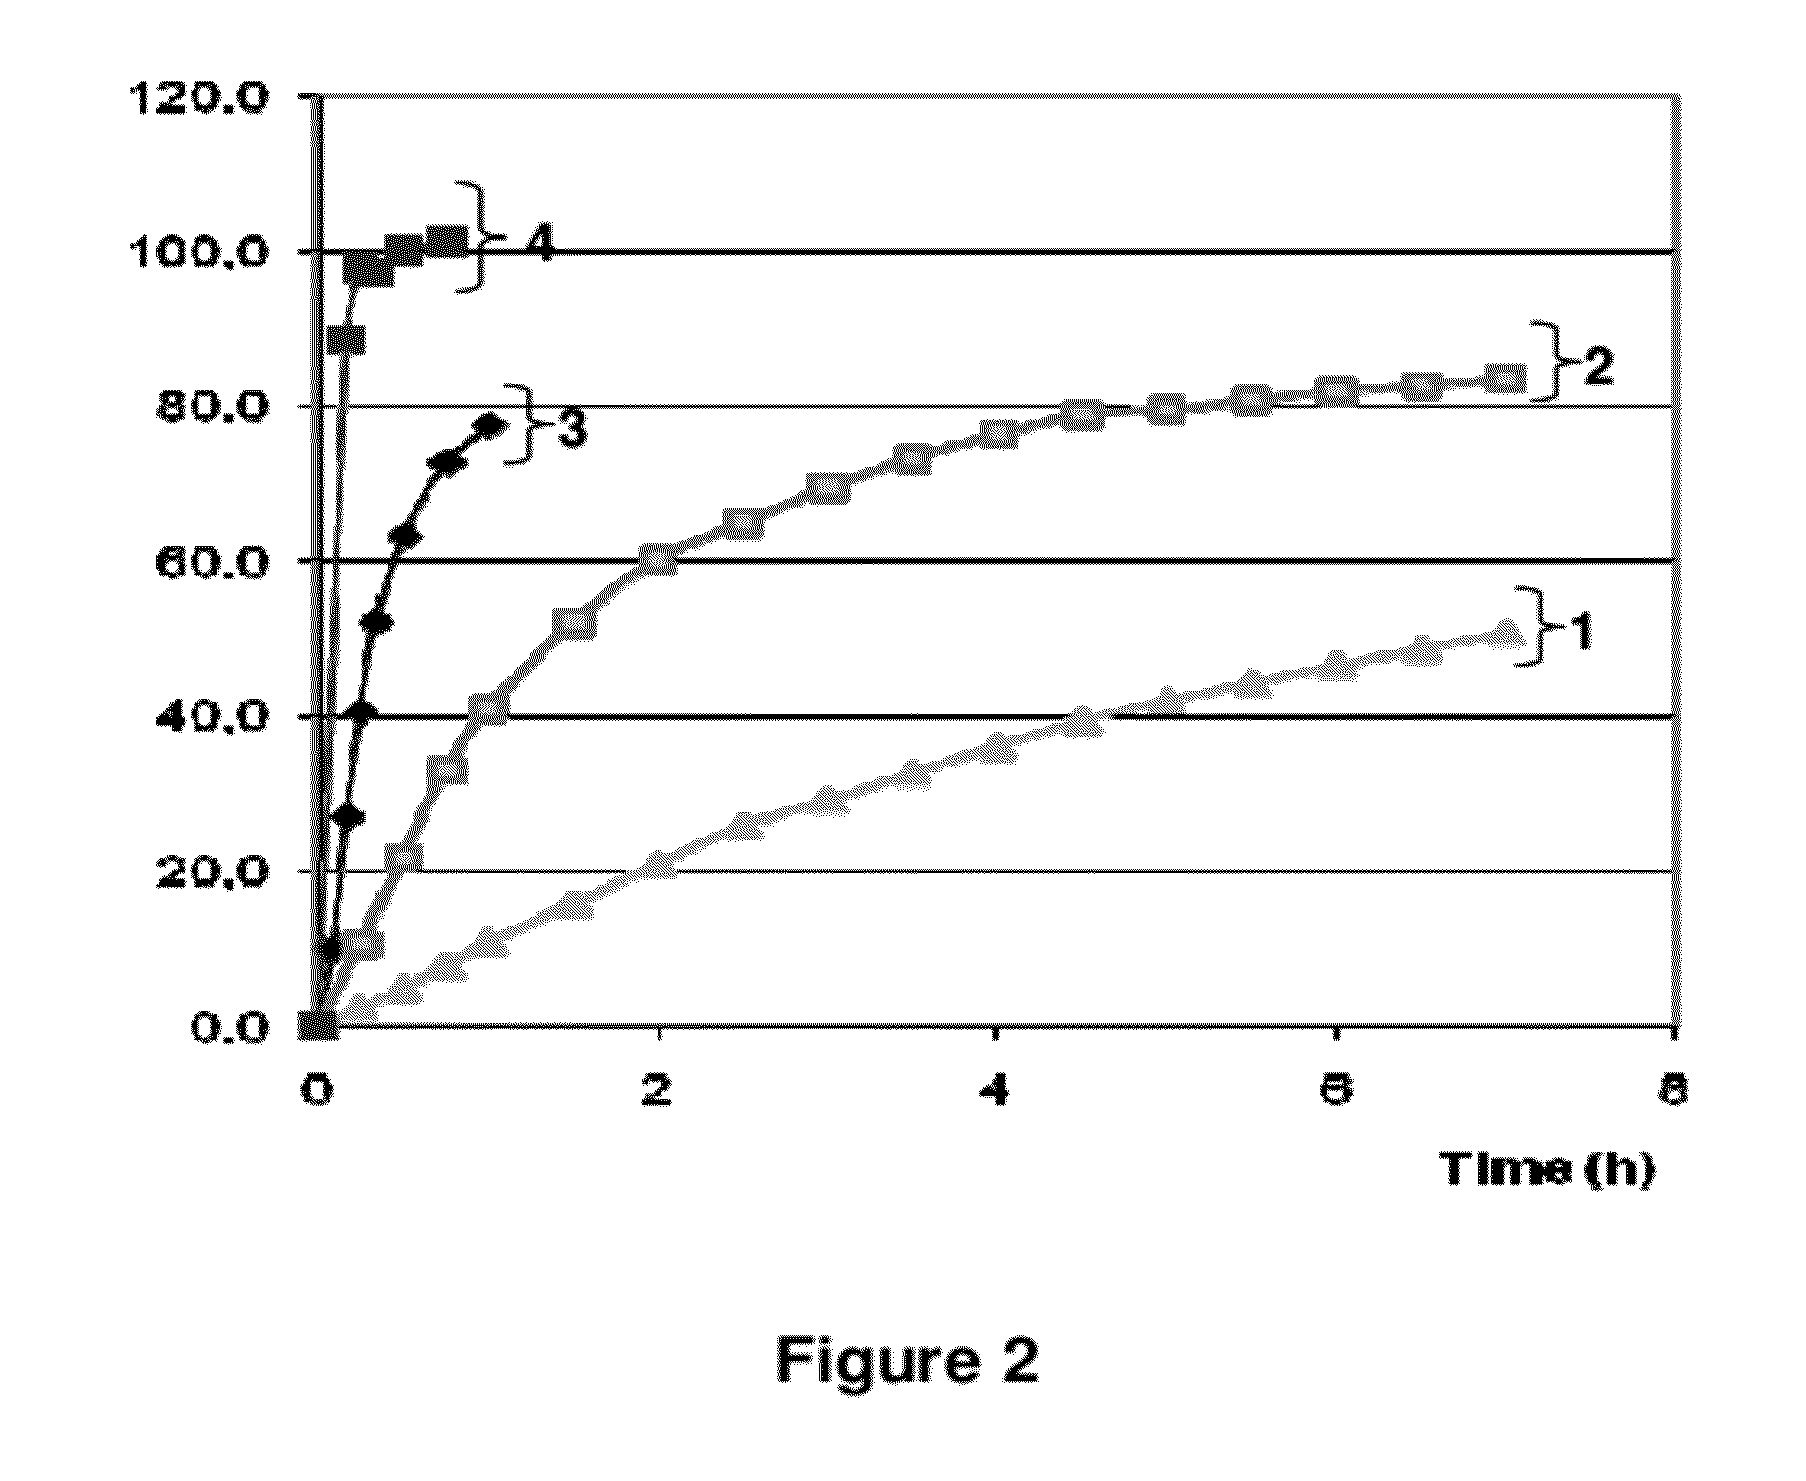 Pharmaceutical compositions comprising active drugs, contraceptive kits comprising active drugs, and methods of administering the same